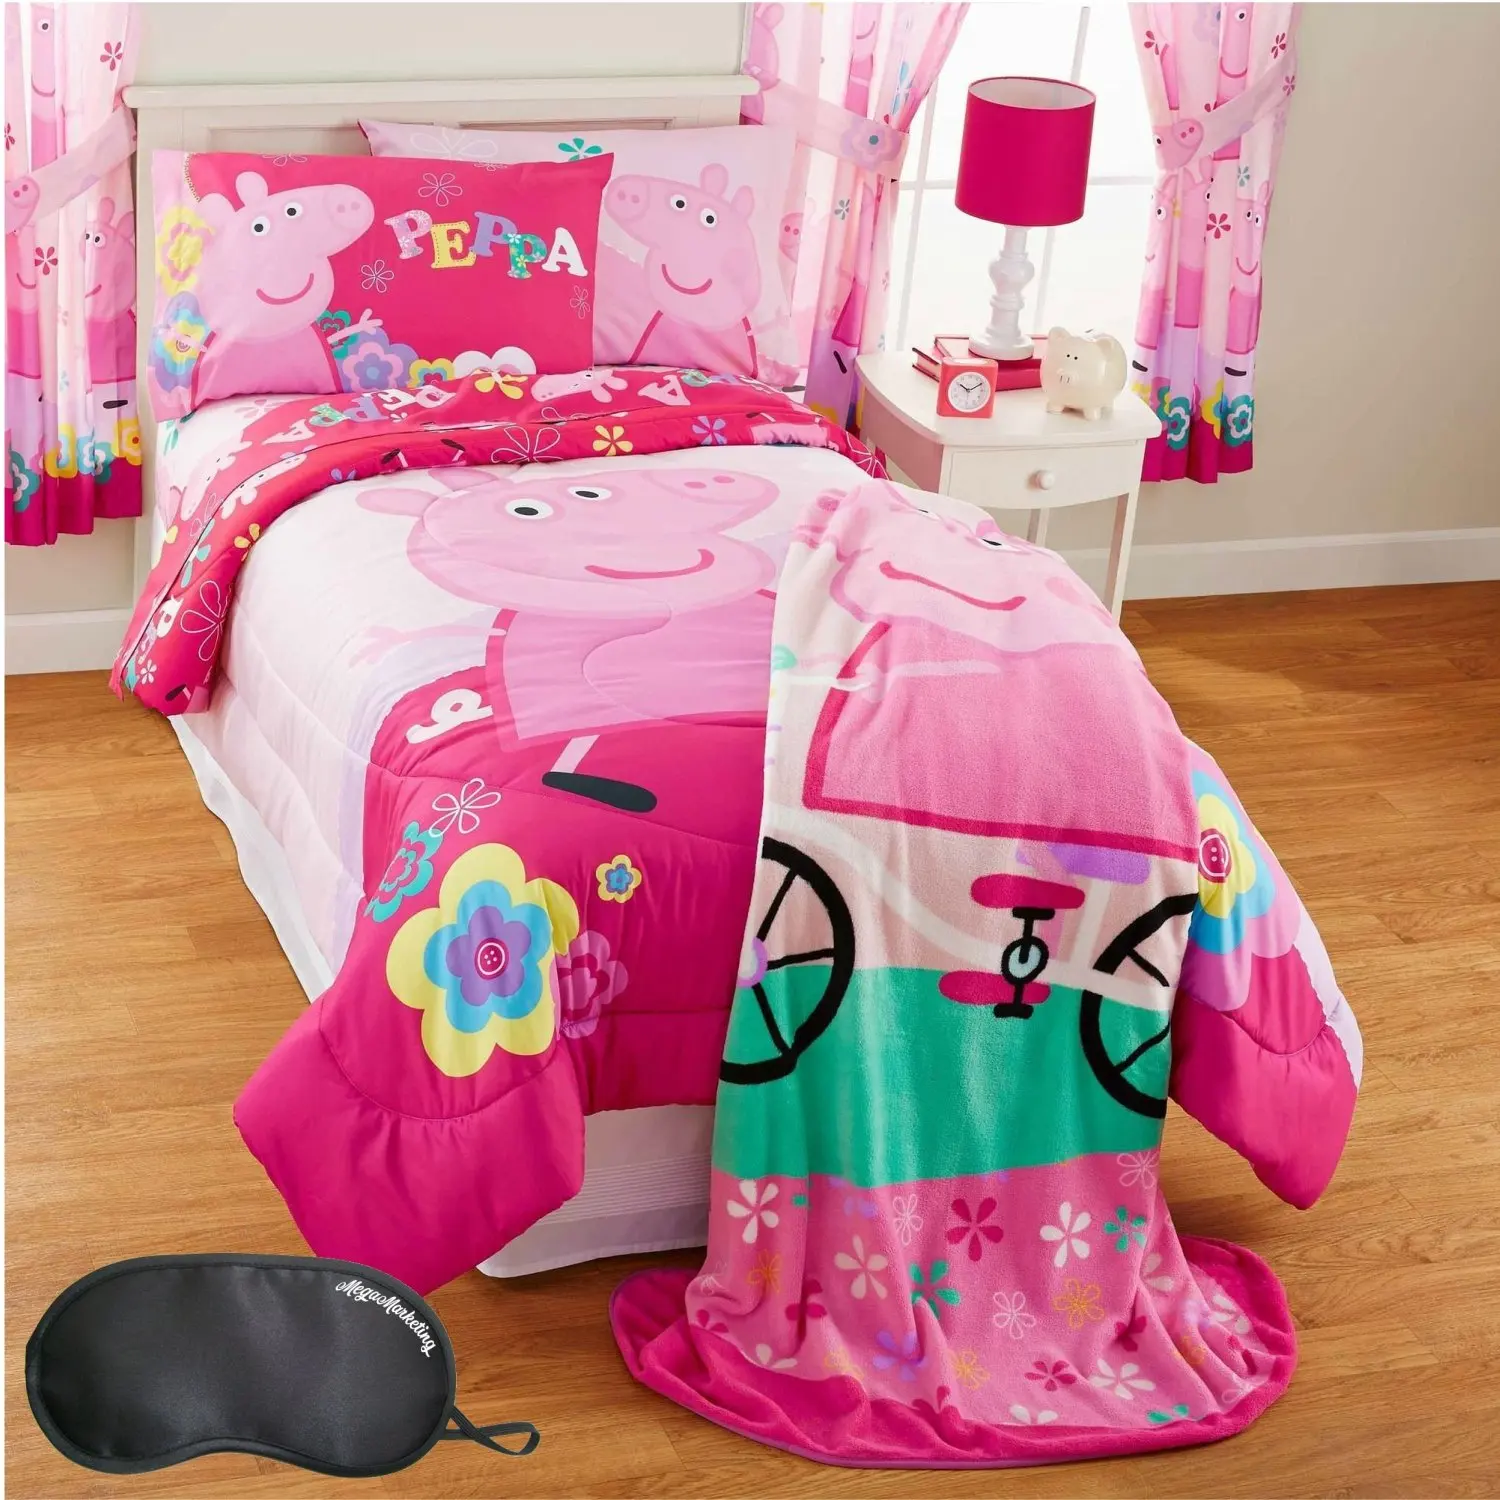 Cheap Peppa Pig Bedding Find Peppa Pig Bedding Deals On Line At